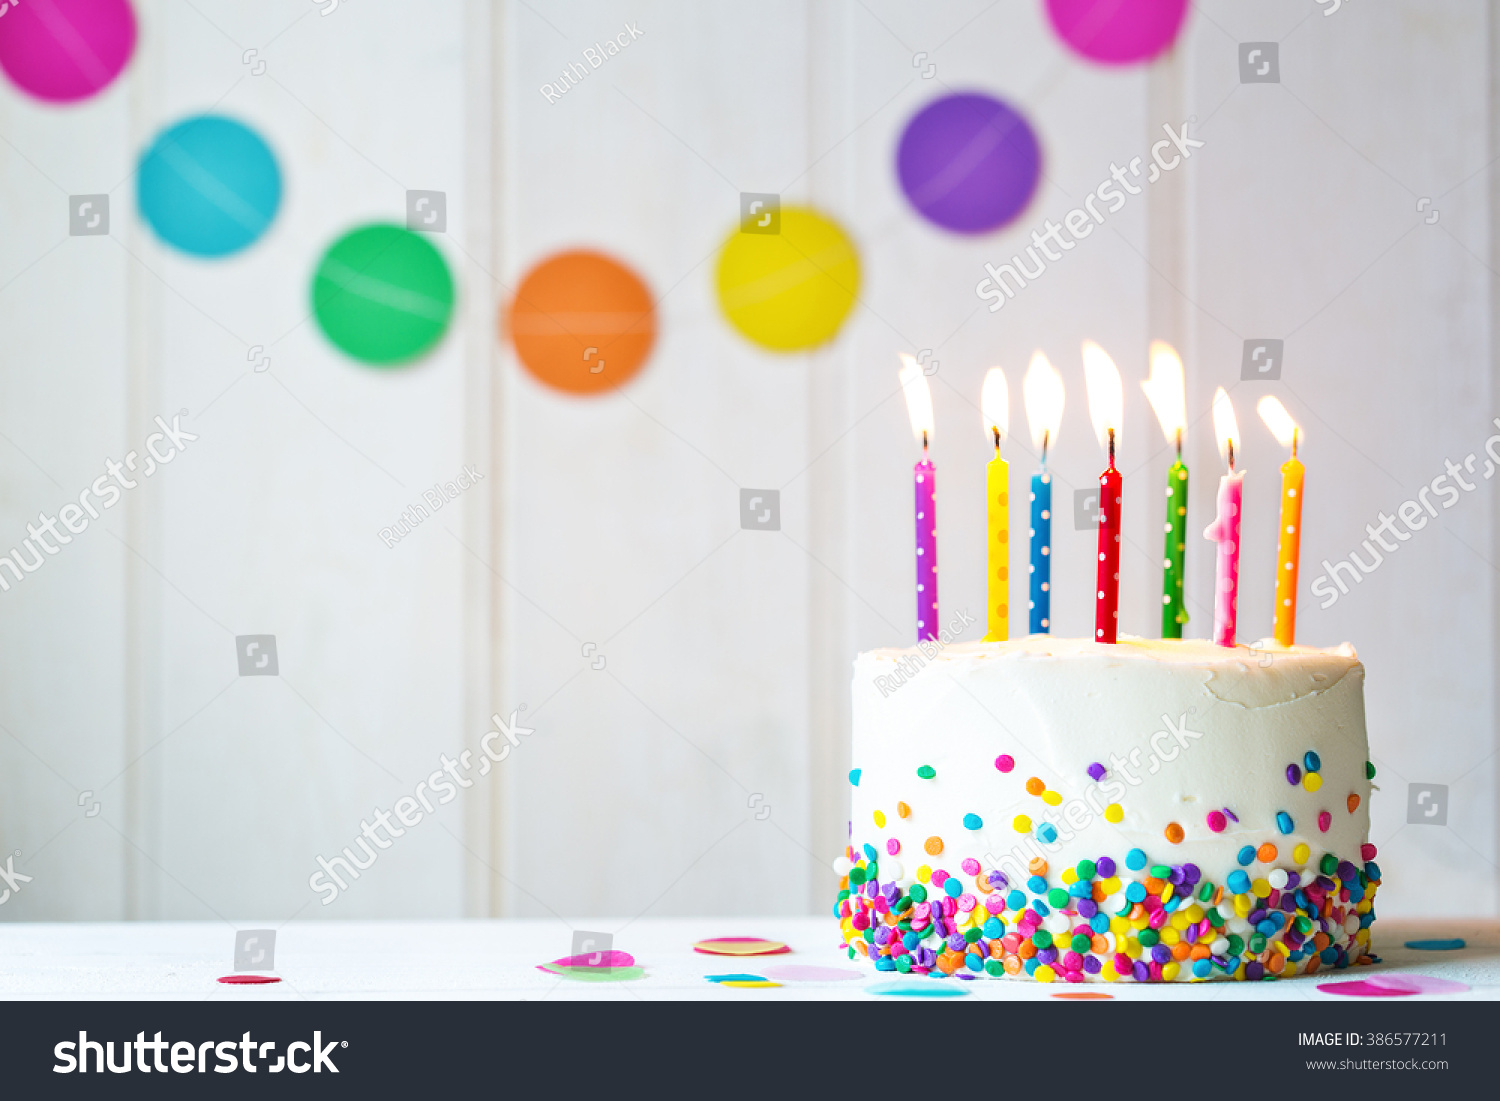 PowerPoint Template: birthday cake with colorful candles ...